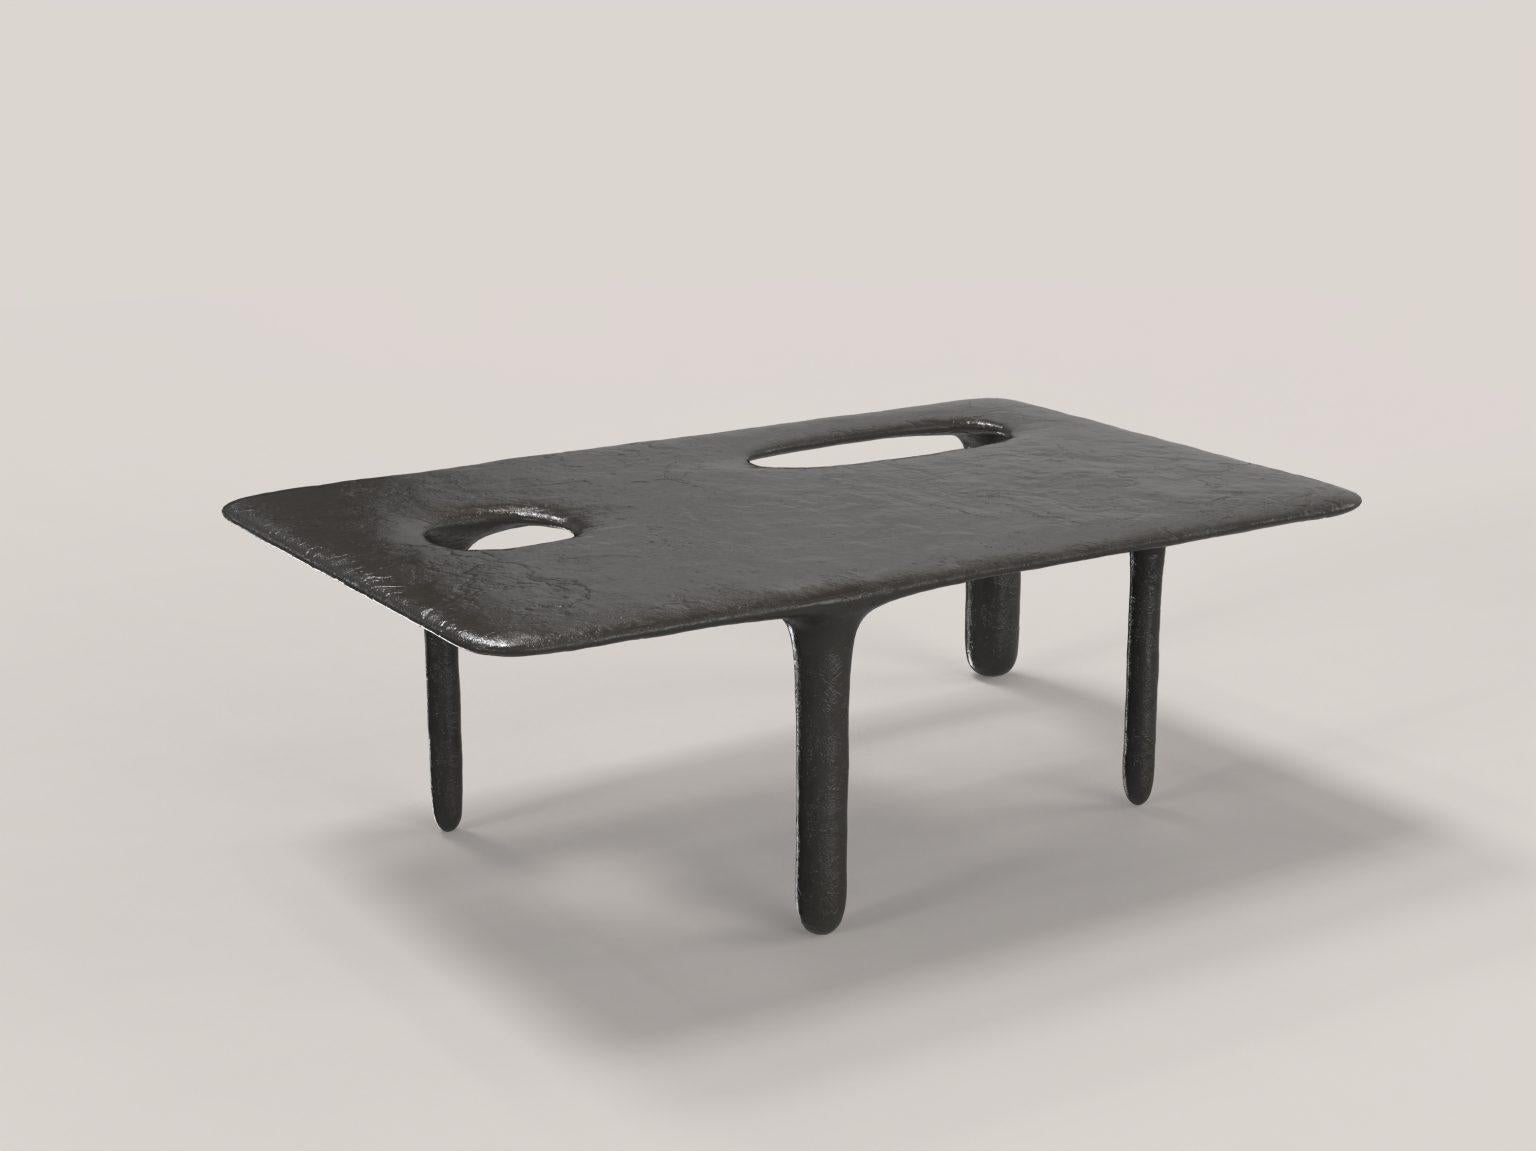 Italian Set of 2 Oasi V1 and V2 Low Tables by Edizione Limitata For Sale